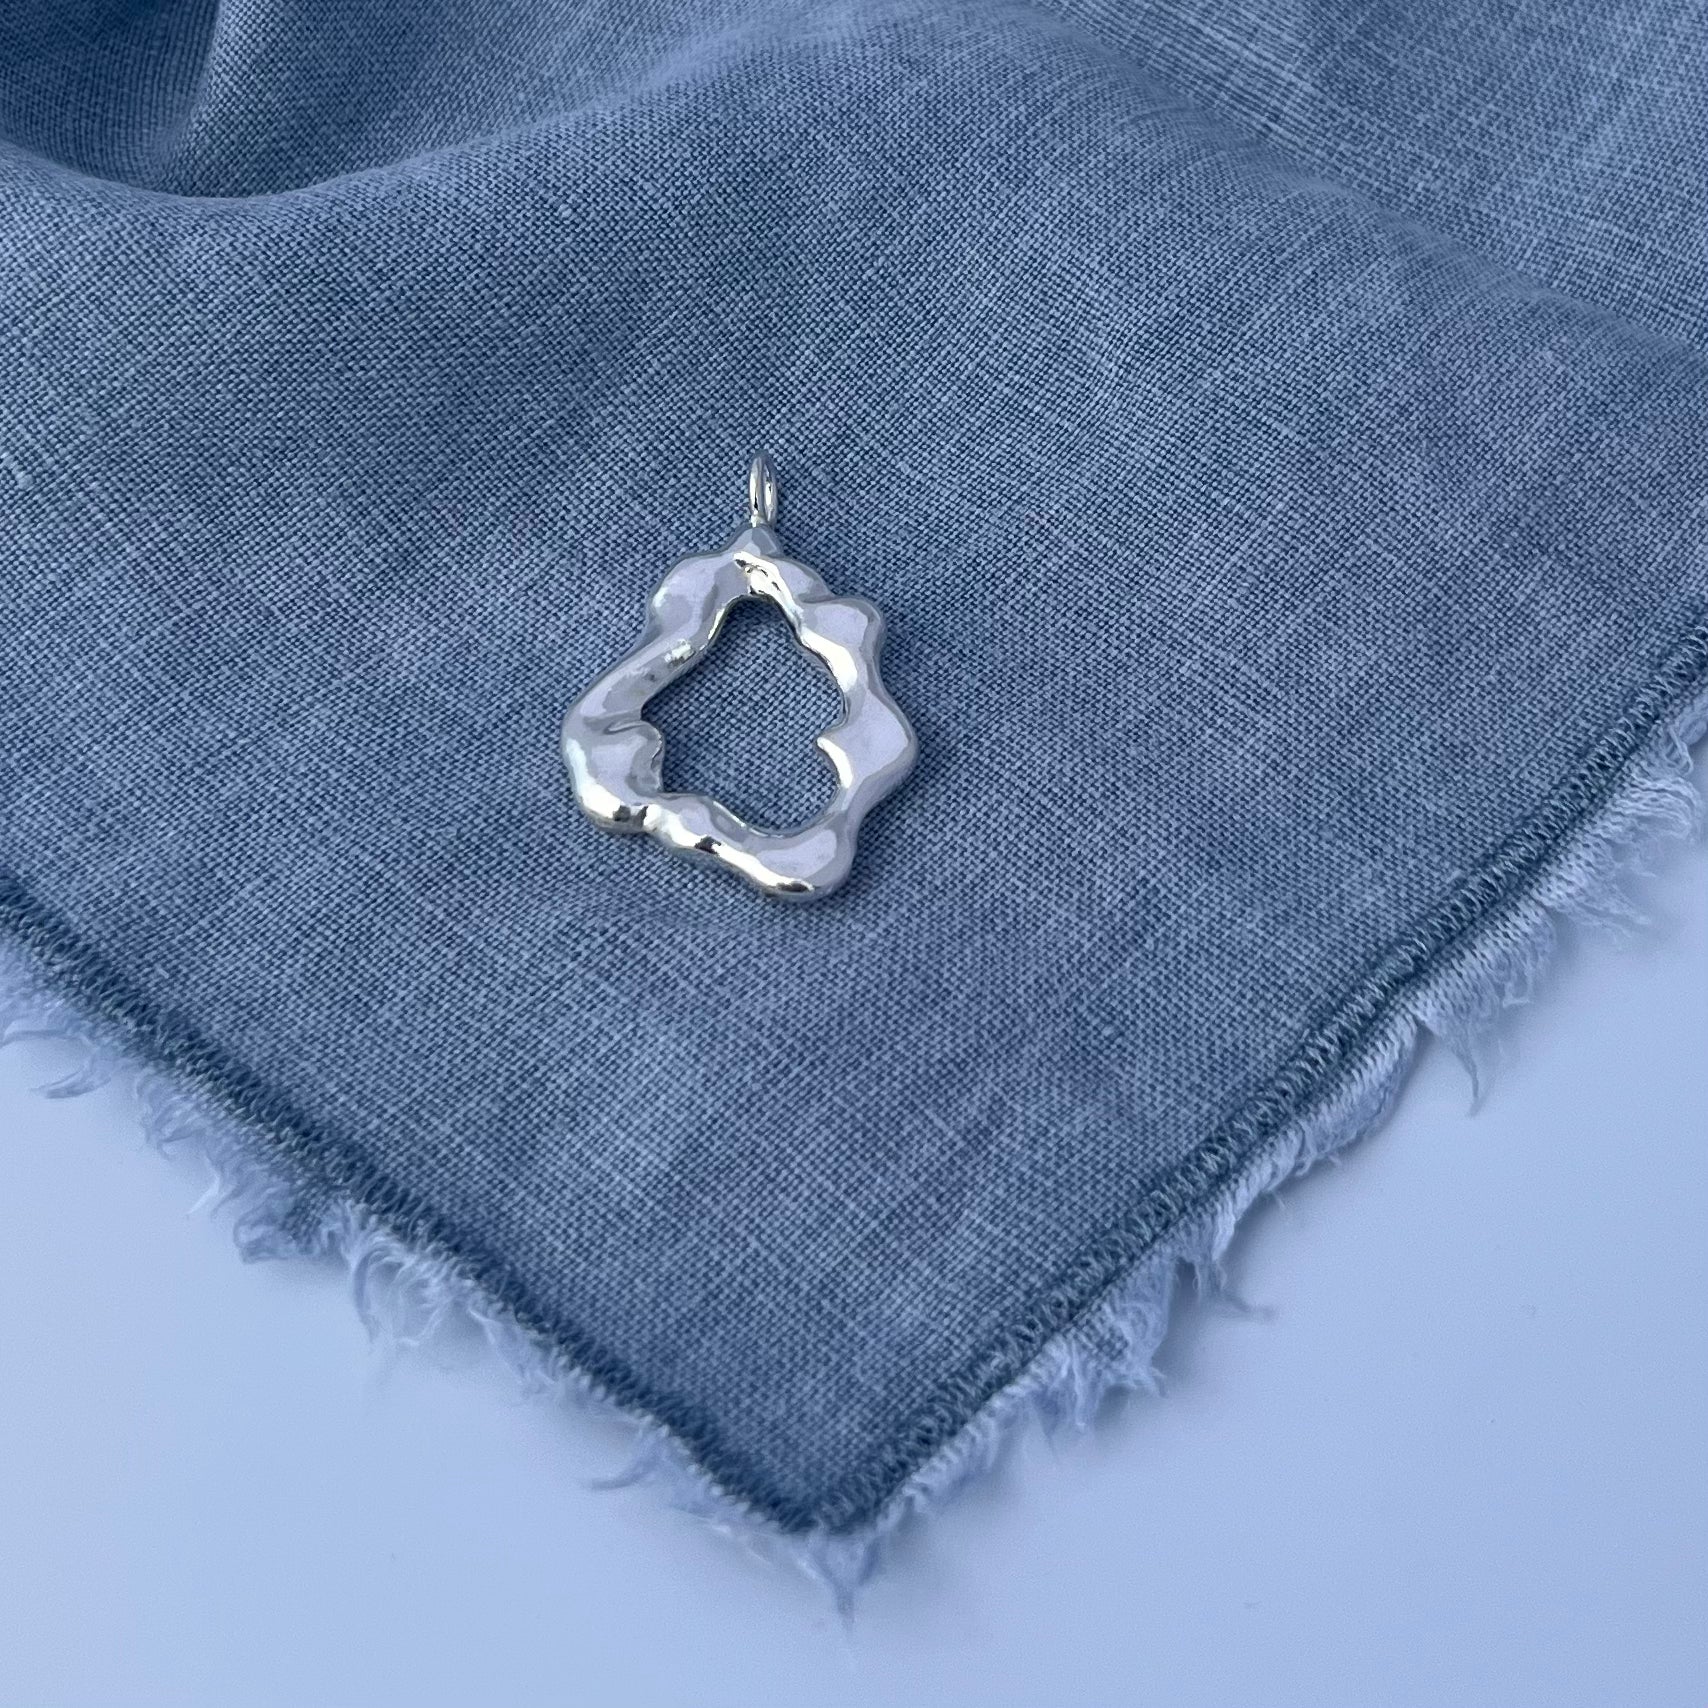 The 'Mist pendant'. A sterling silver abstract pendant. The background is blue linen.